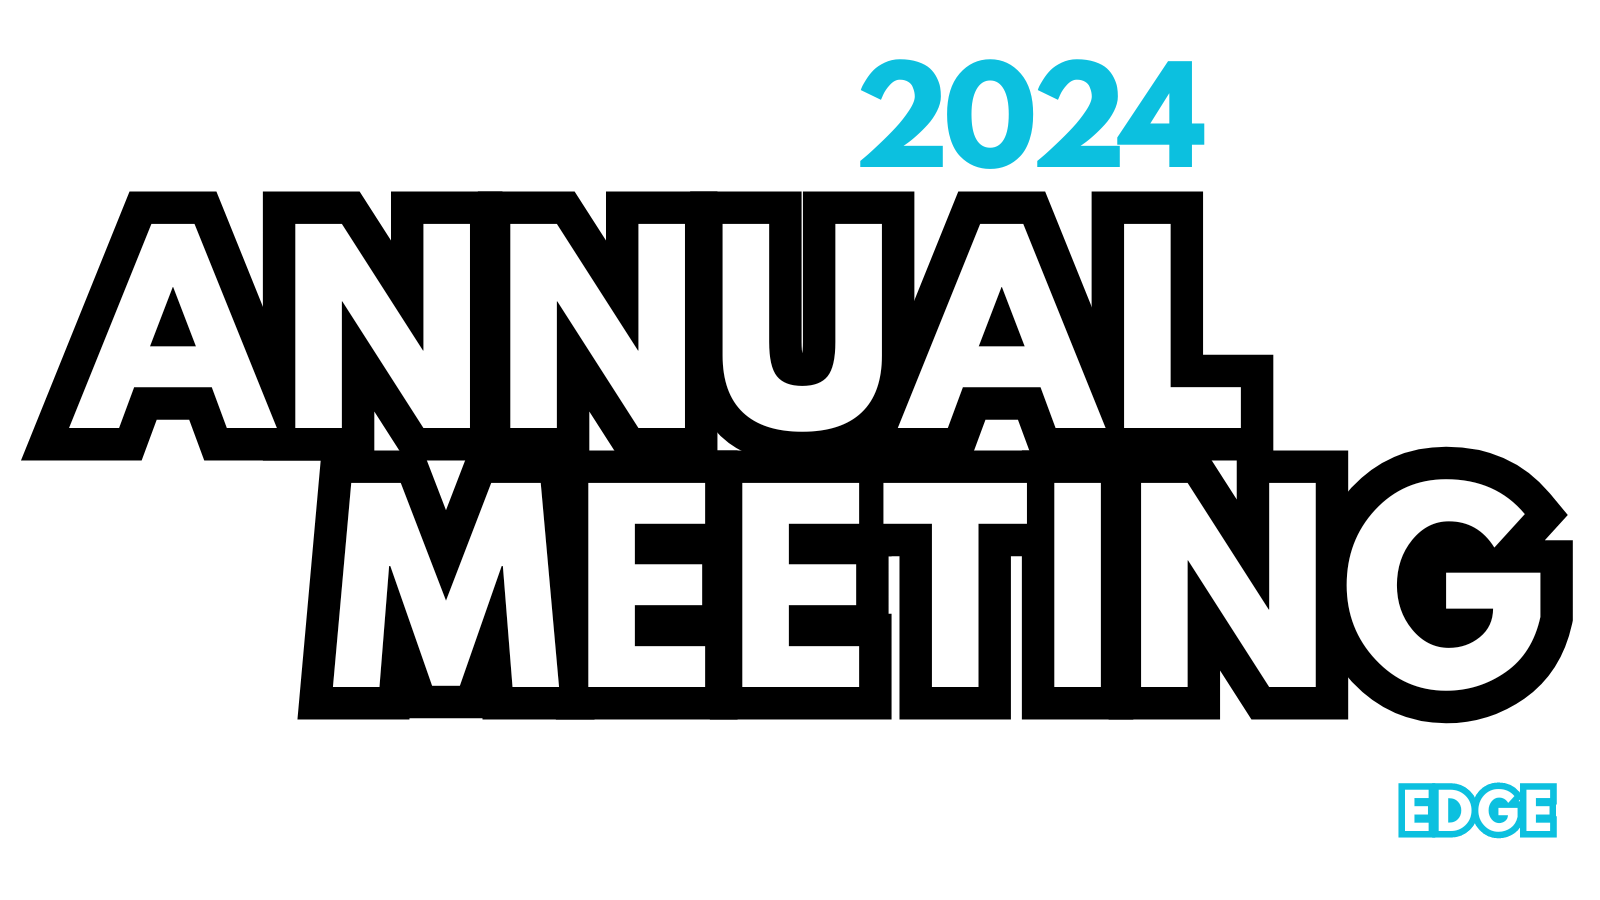 2024 Annual Meeting - Strengthening Our Competitive Edge